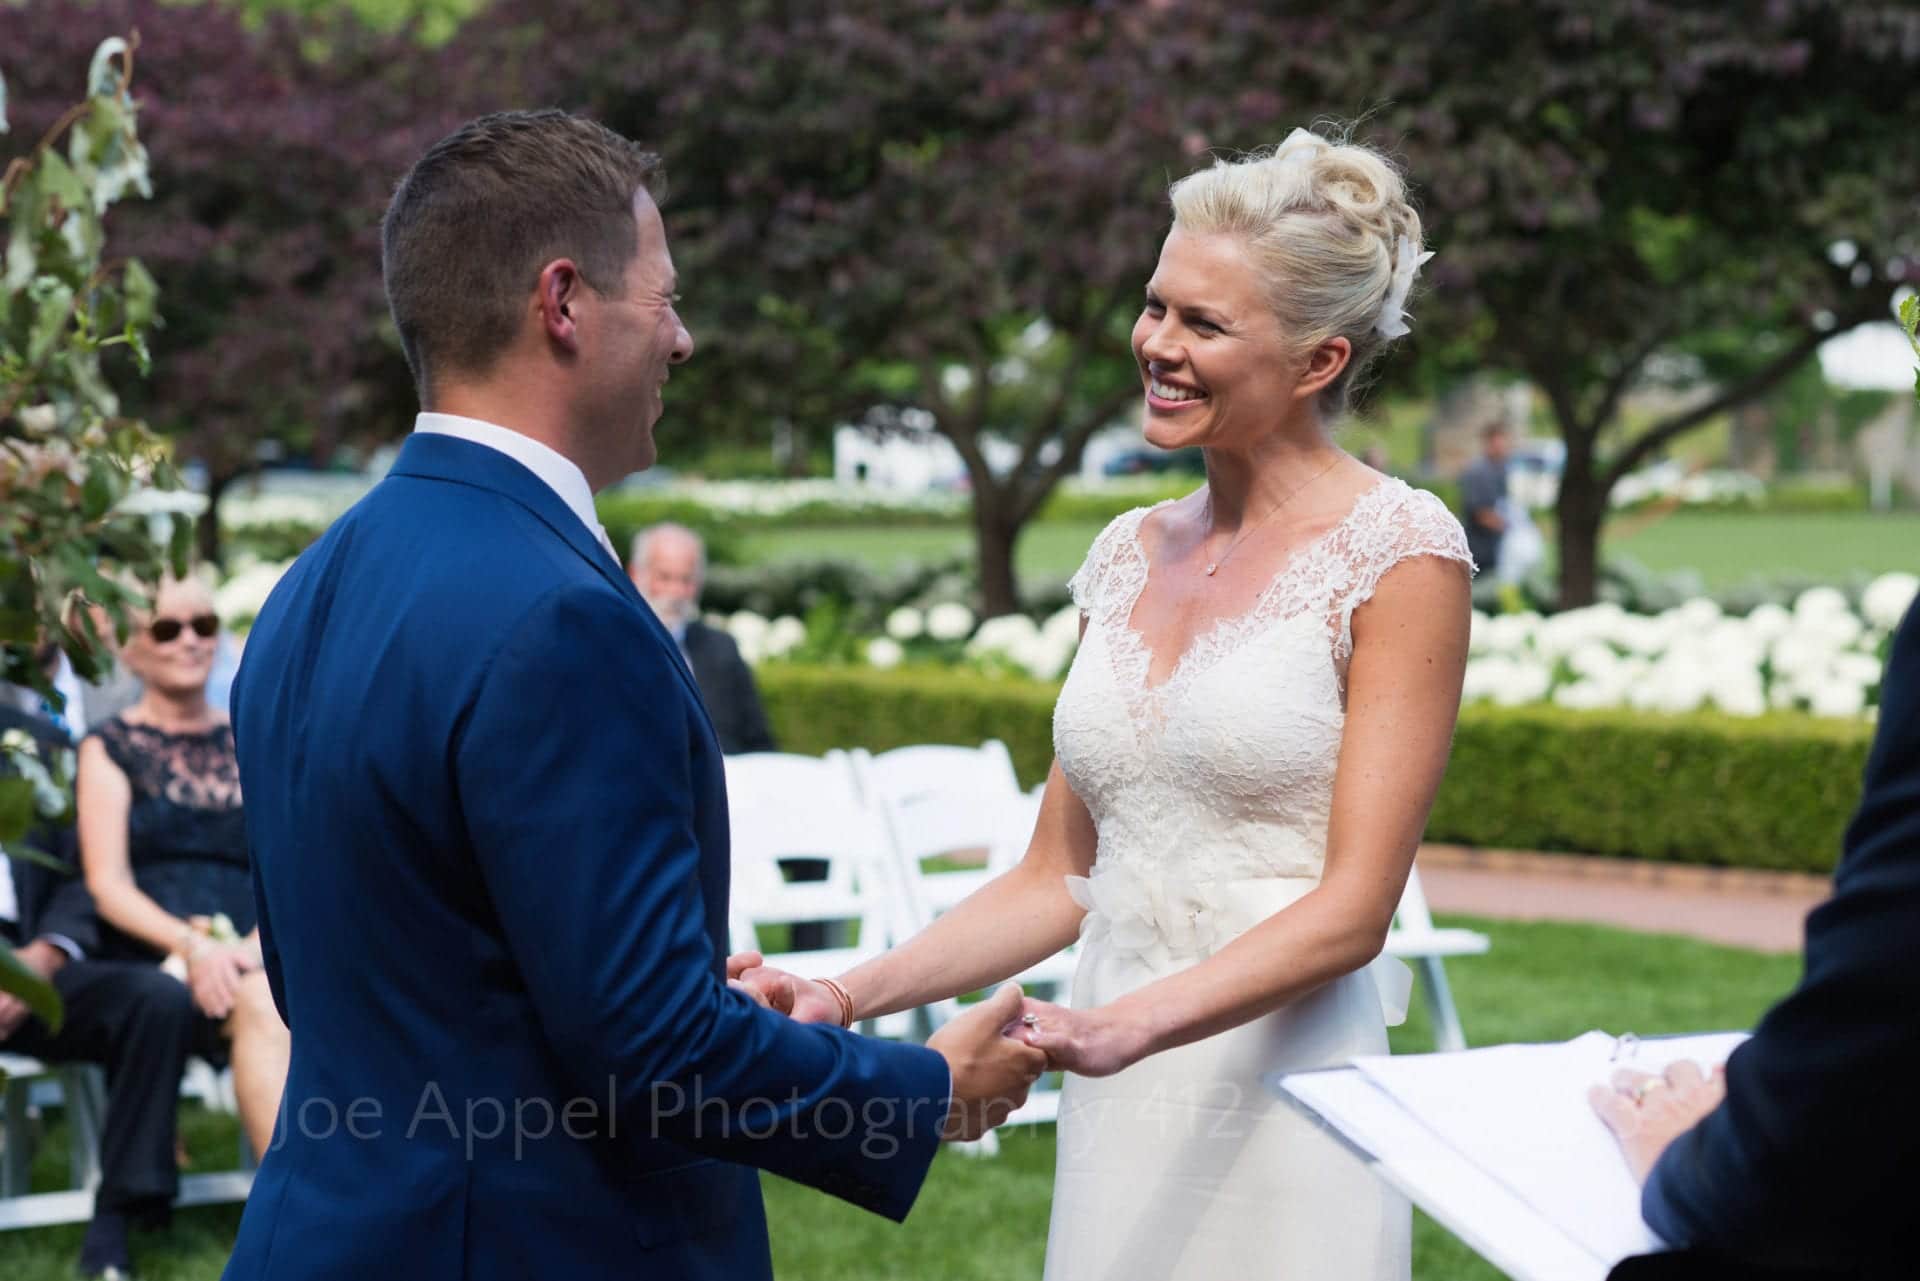 A bride smiles at her groom during their wedding ceremony while they hold both hands during their Omni Bedford Springs Resort Wedding.